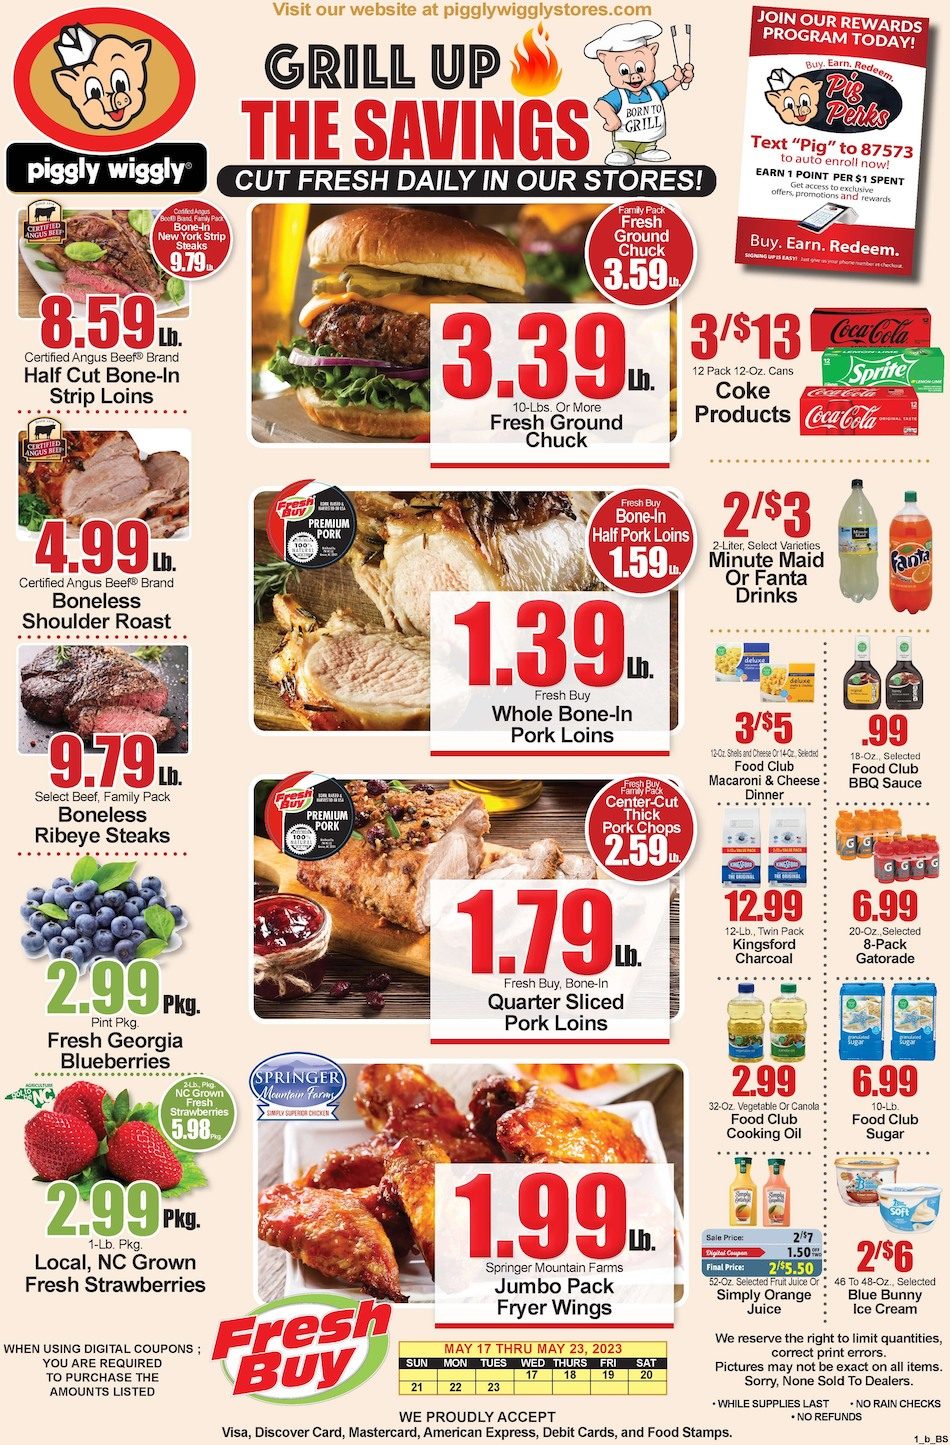 piggly wiggly weekly ad gilbertown al